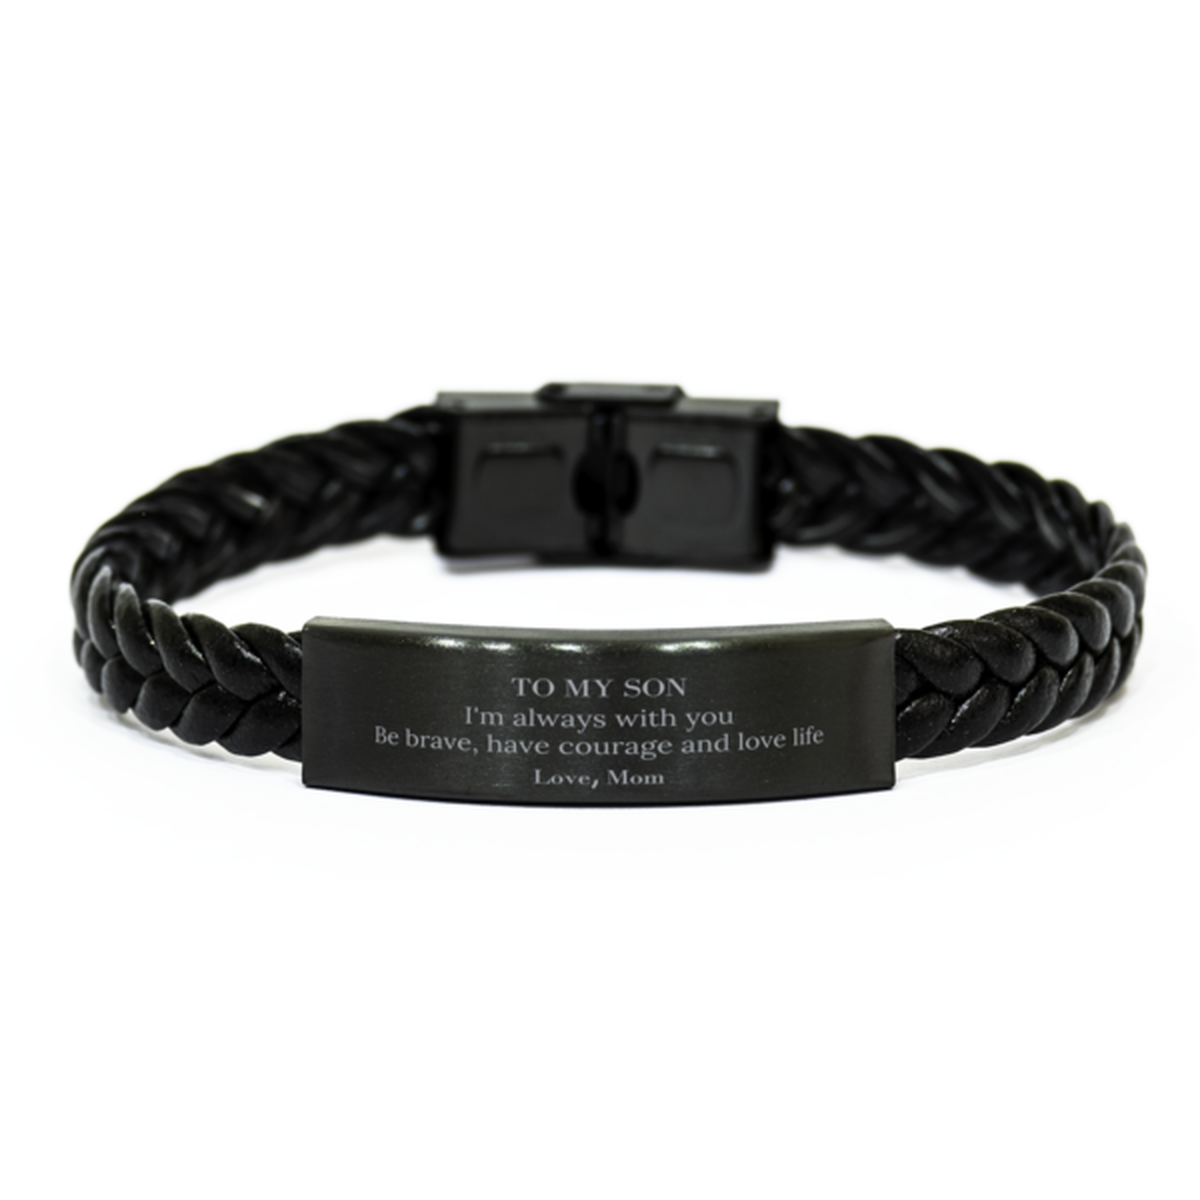 To My Son Gifts from Mom, Unique Braided Leather Bracelet Inspirational Christmas Birthday Graduation Gifts for Son I'm always with you. Be brave, have courage and love life. Love, Mom